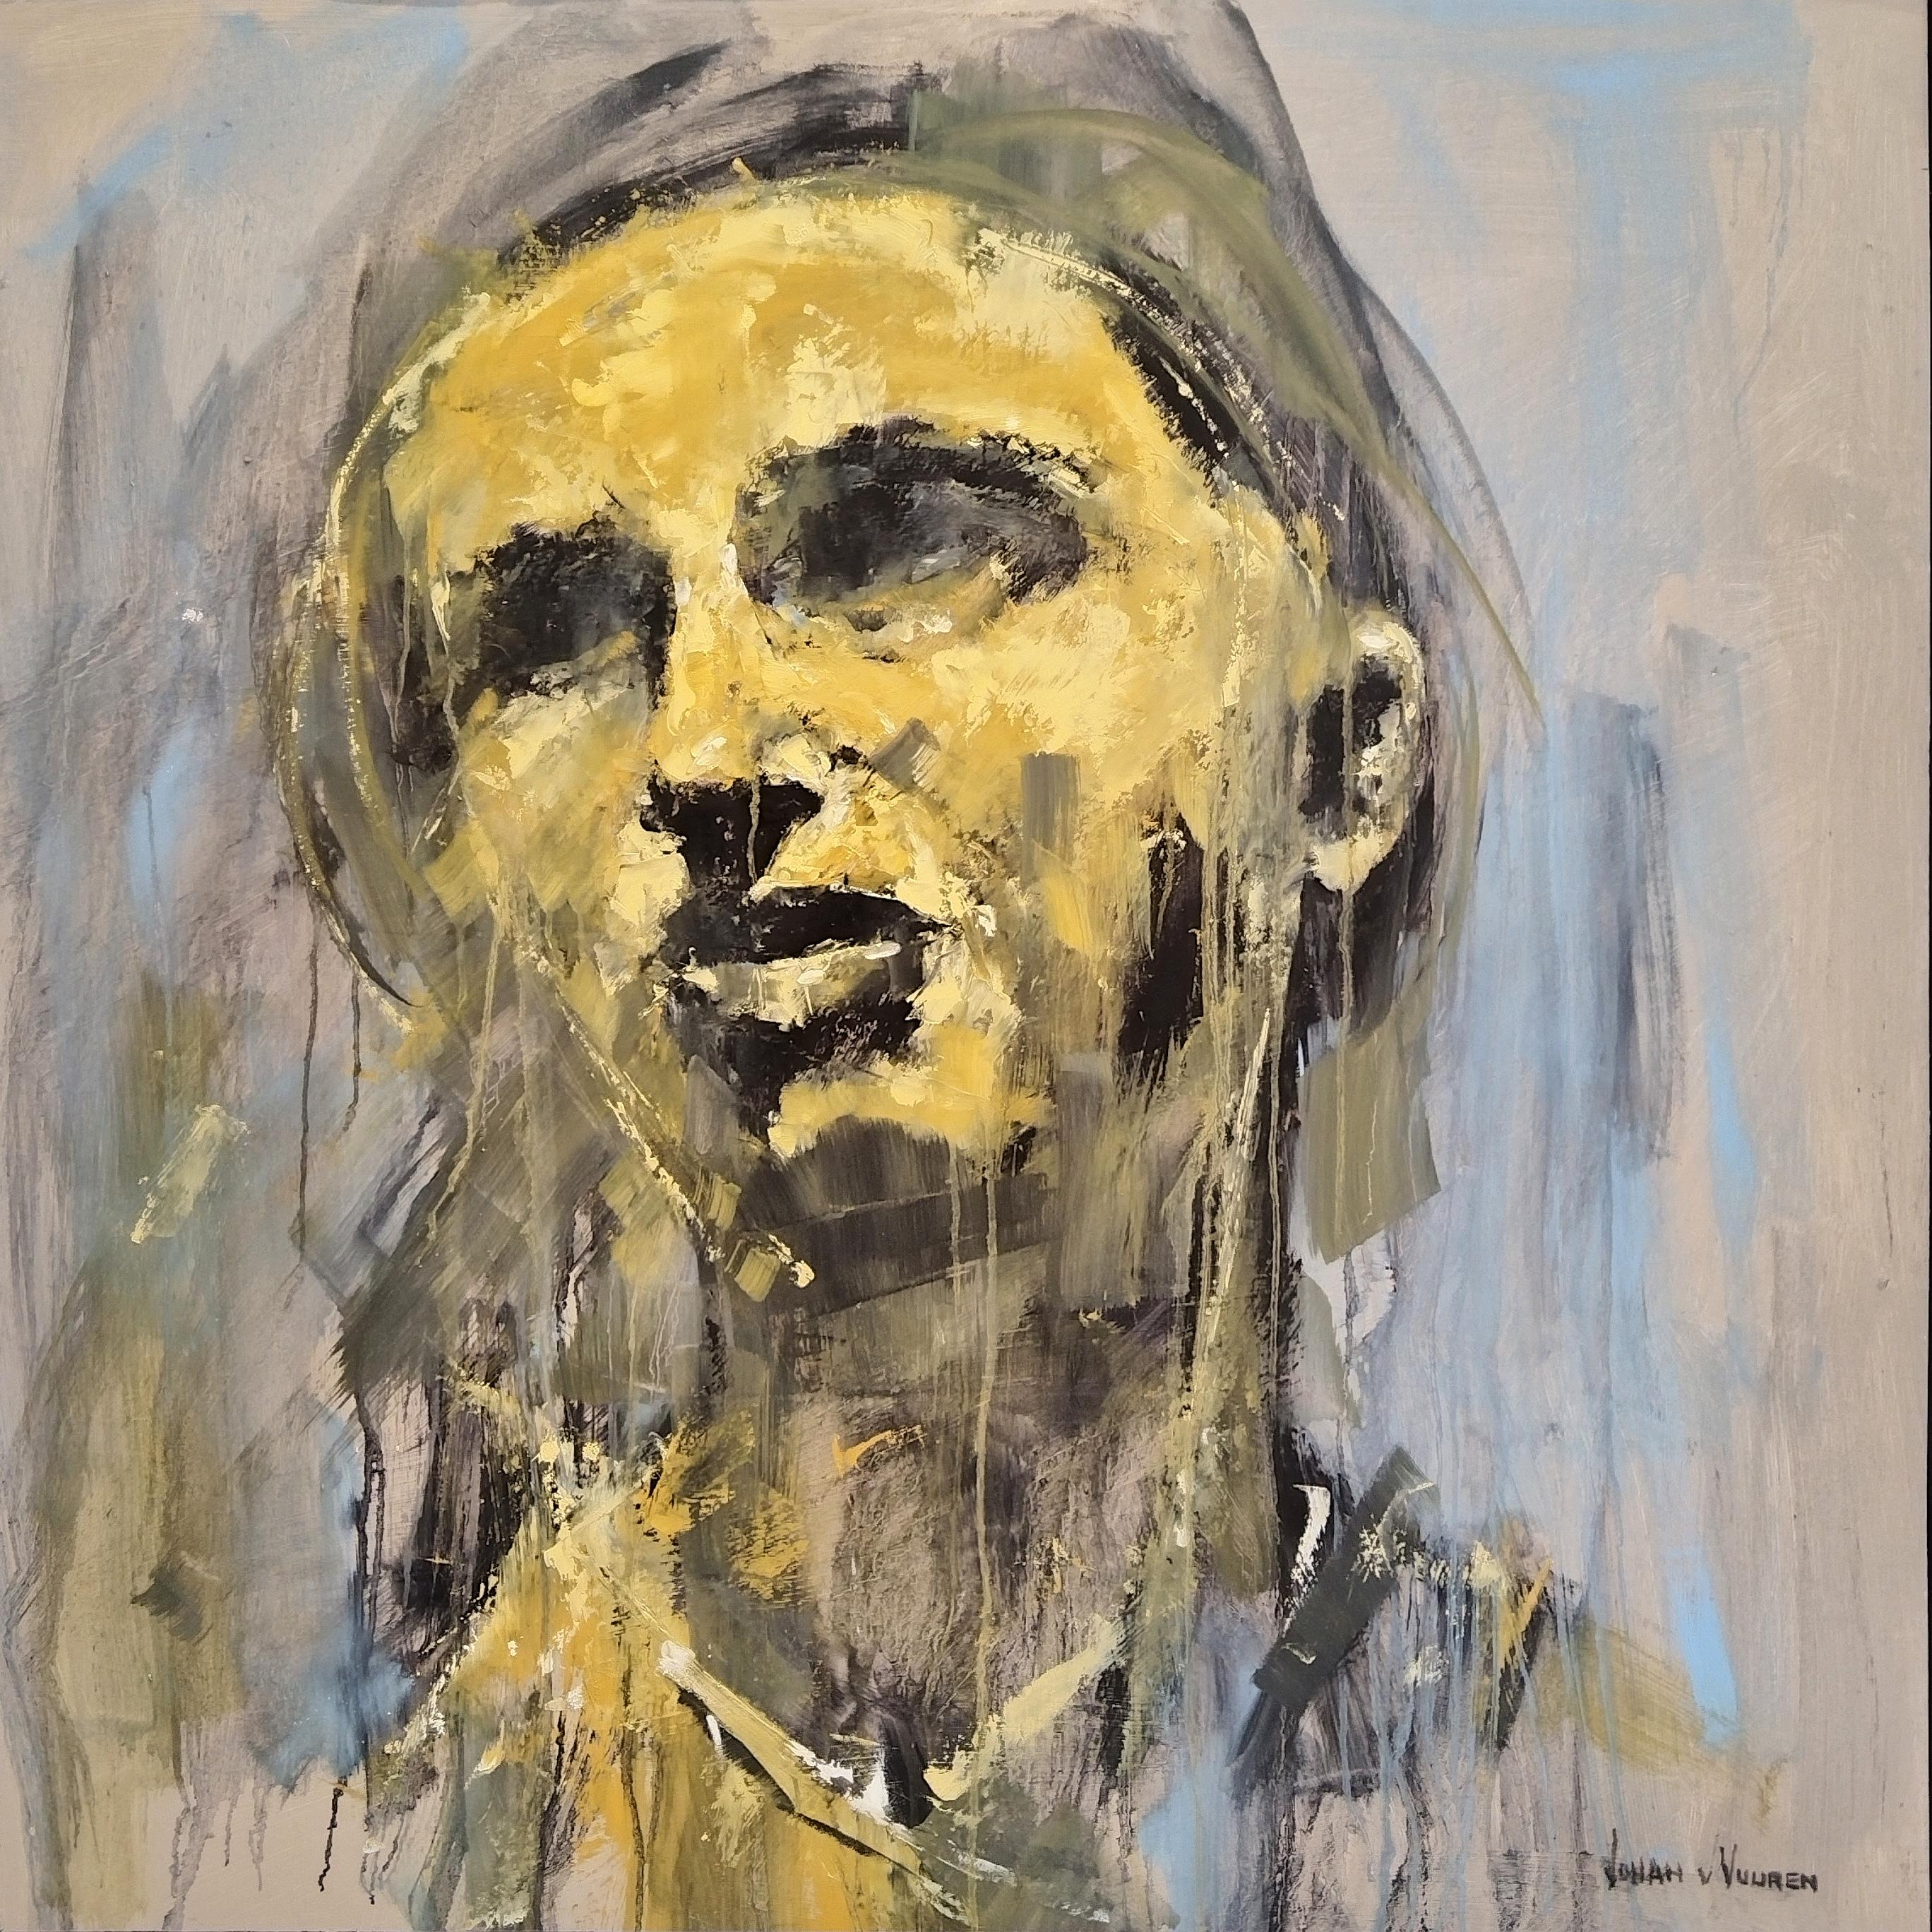 Oil on Board Abstract Expressive Portrait "Looking Up"